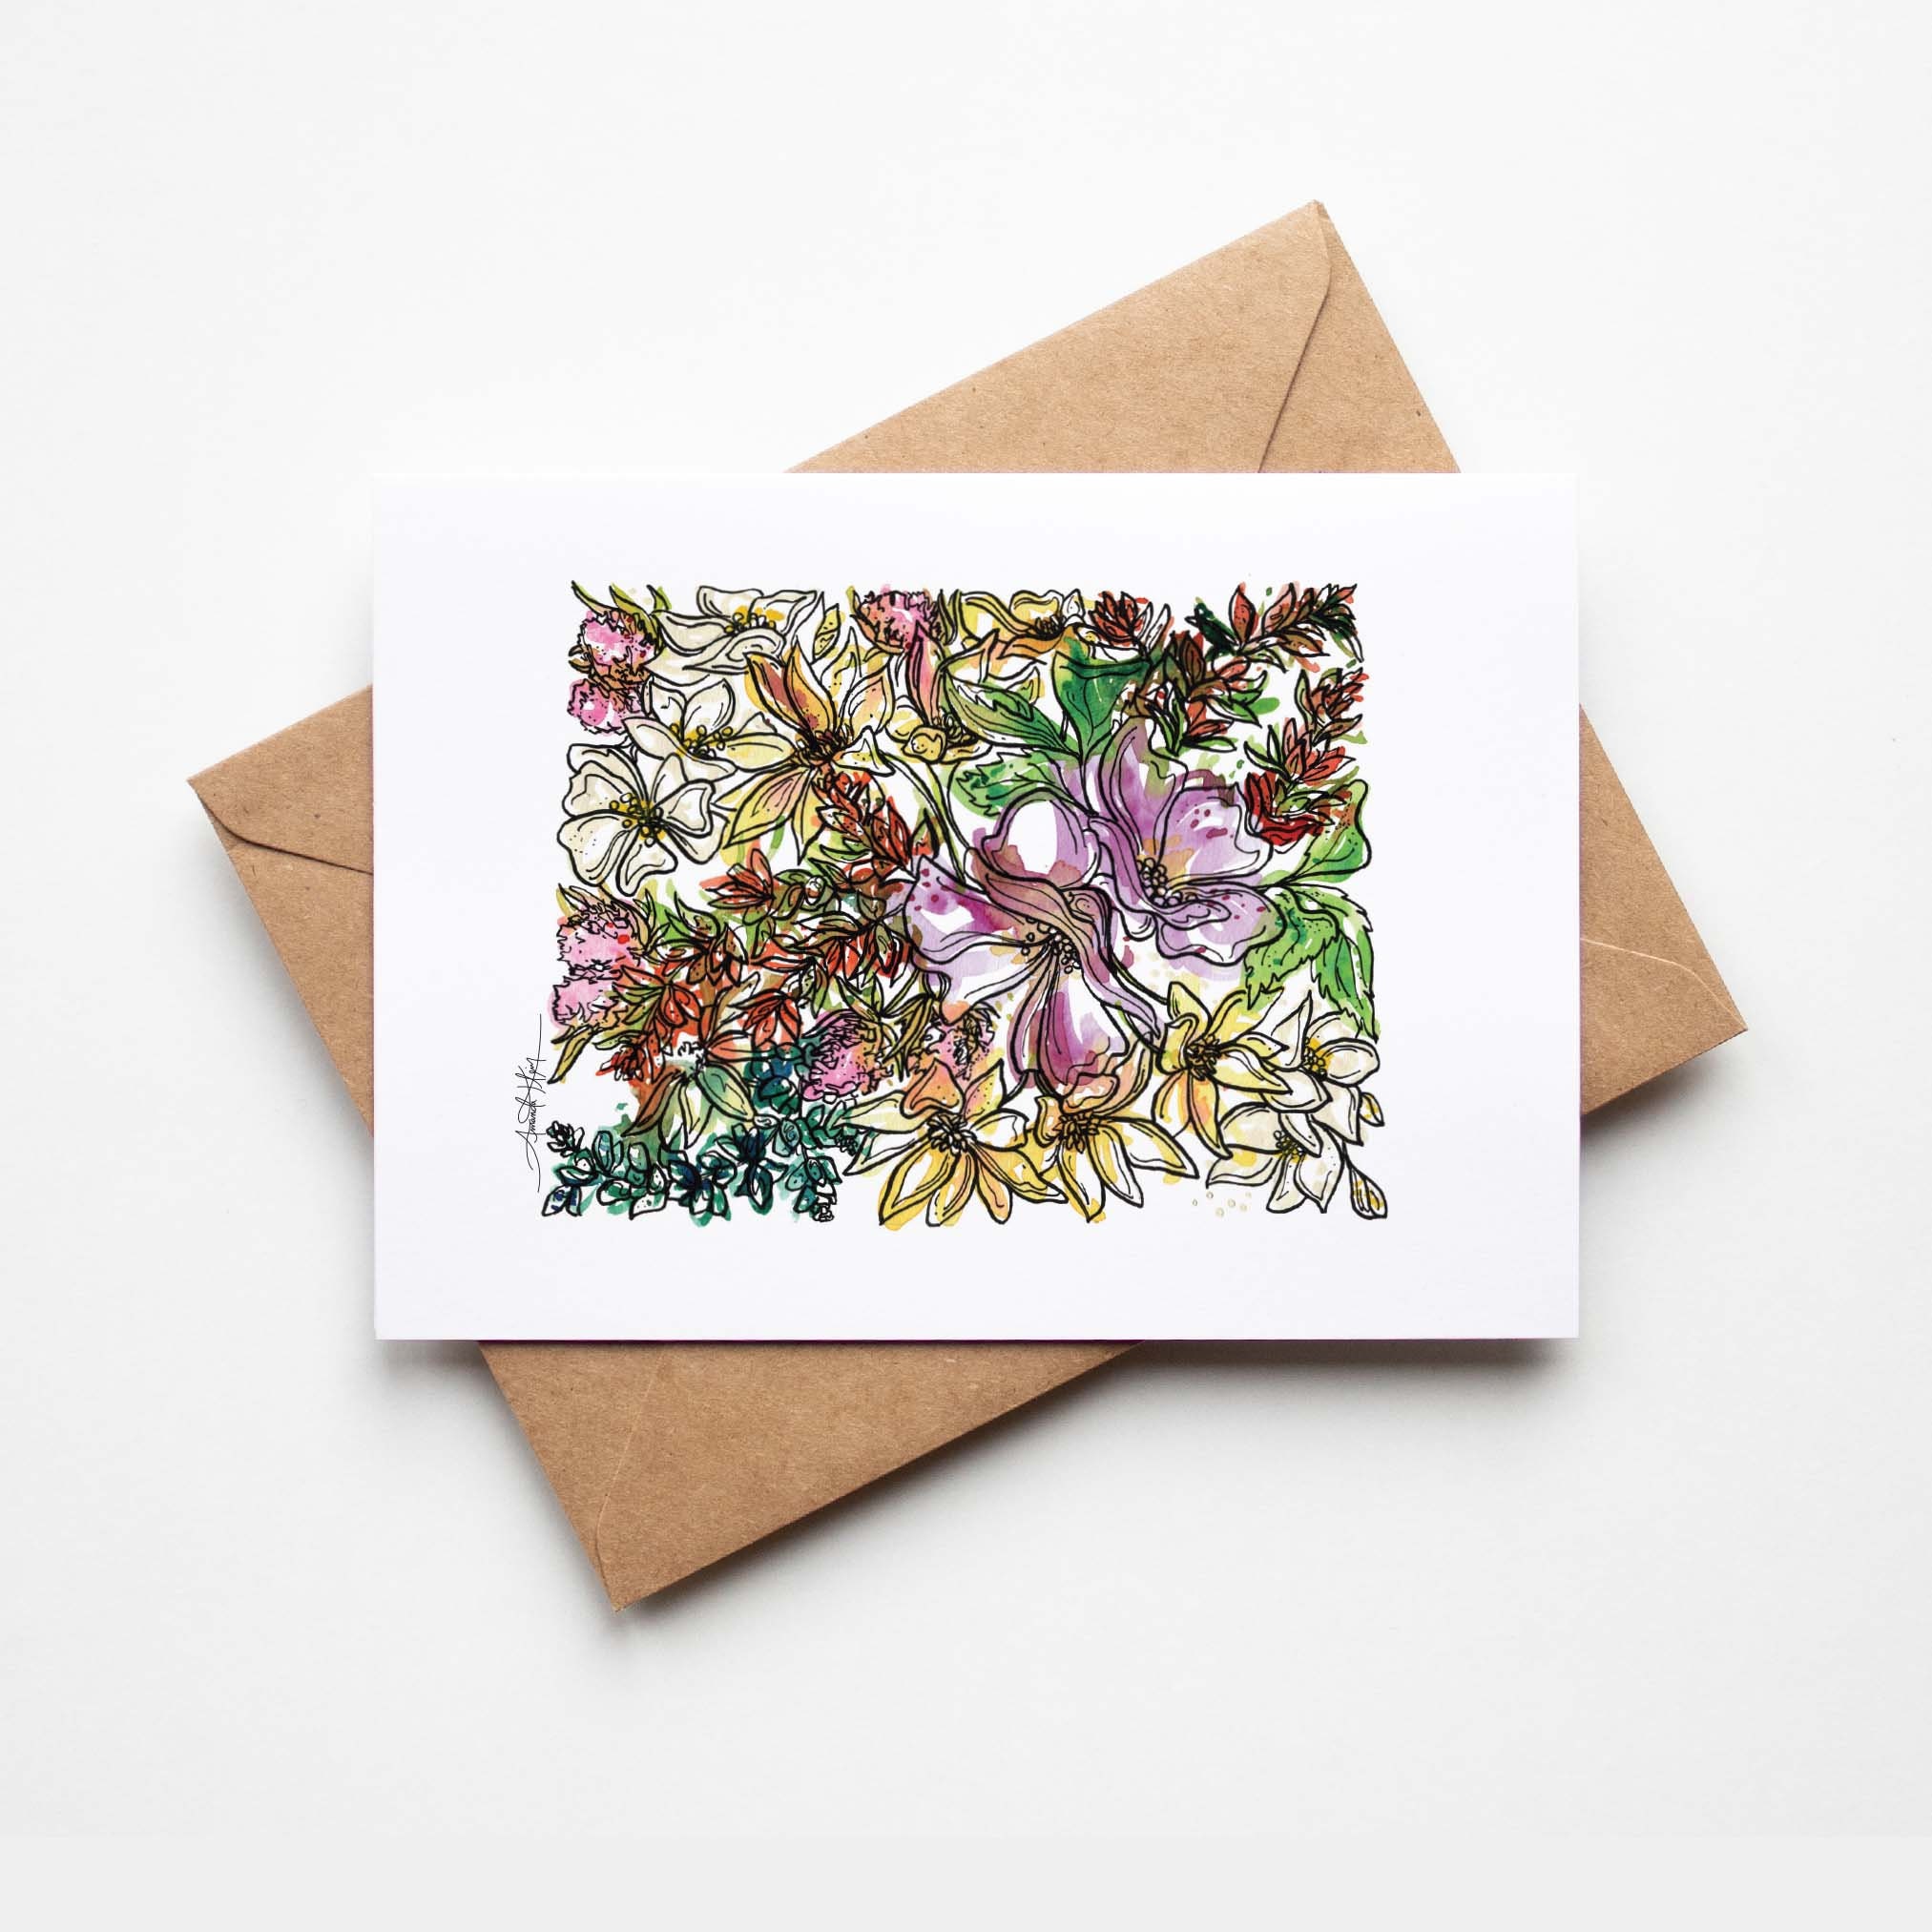 Flower Photo Note Cards With Envelopes Nature Blank Note Cards Handmade 5x7  Flower Photo Greeting Cards Handmade Set Nature GP72 